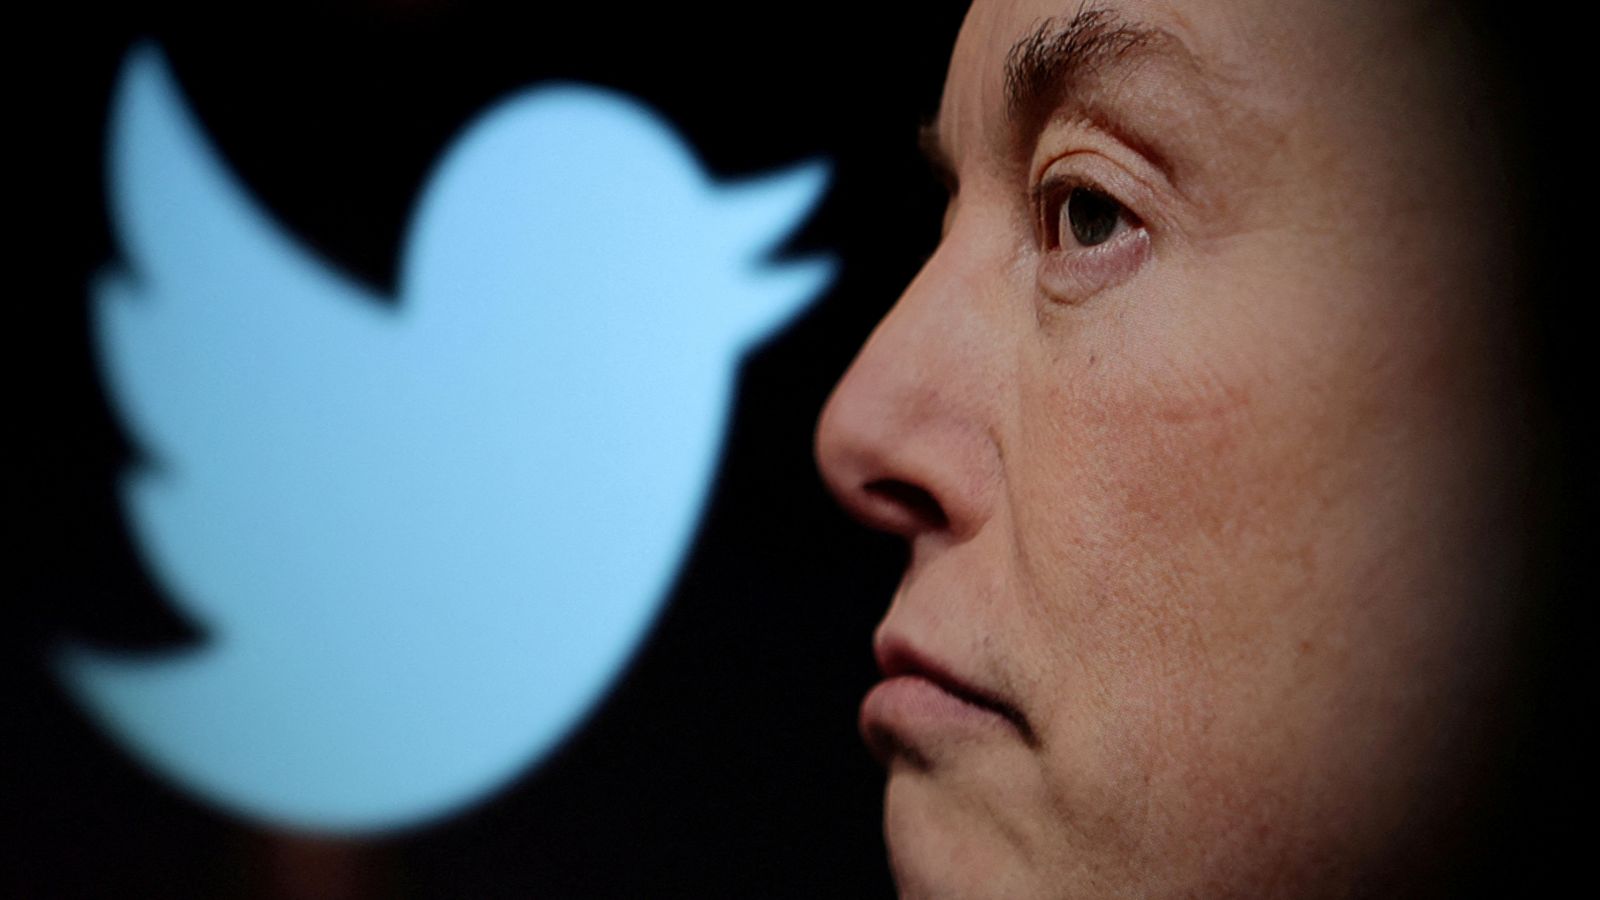 Elon Musk hits out at Apple - and claims tech giant threatened to block Twitter from App Store